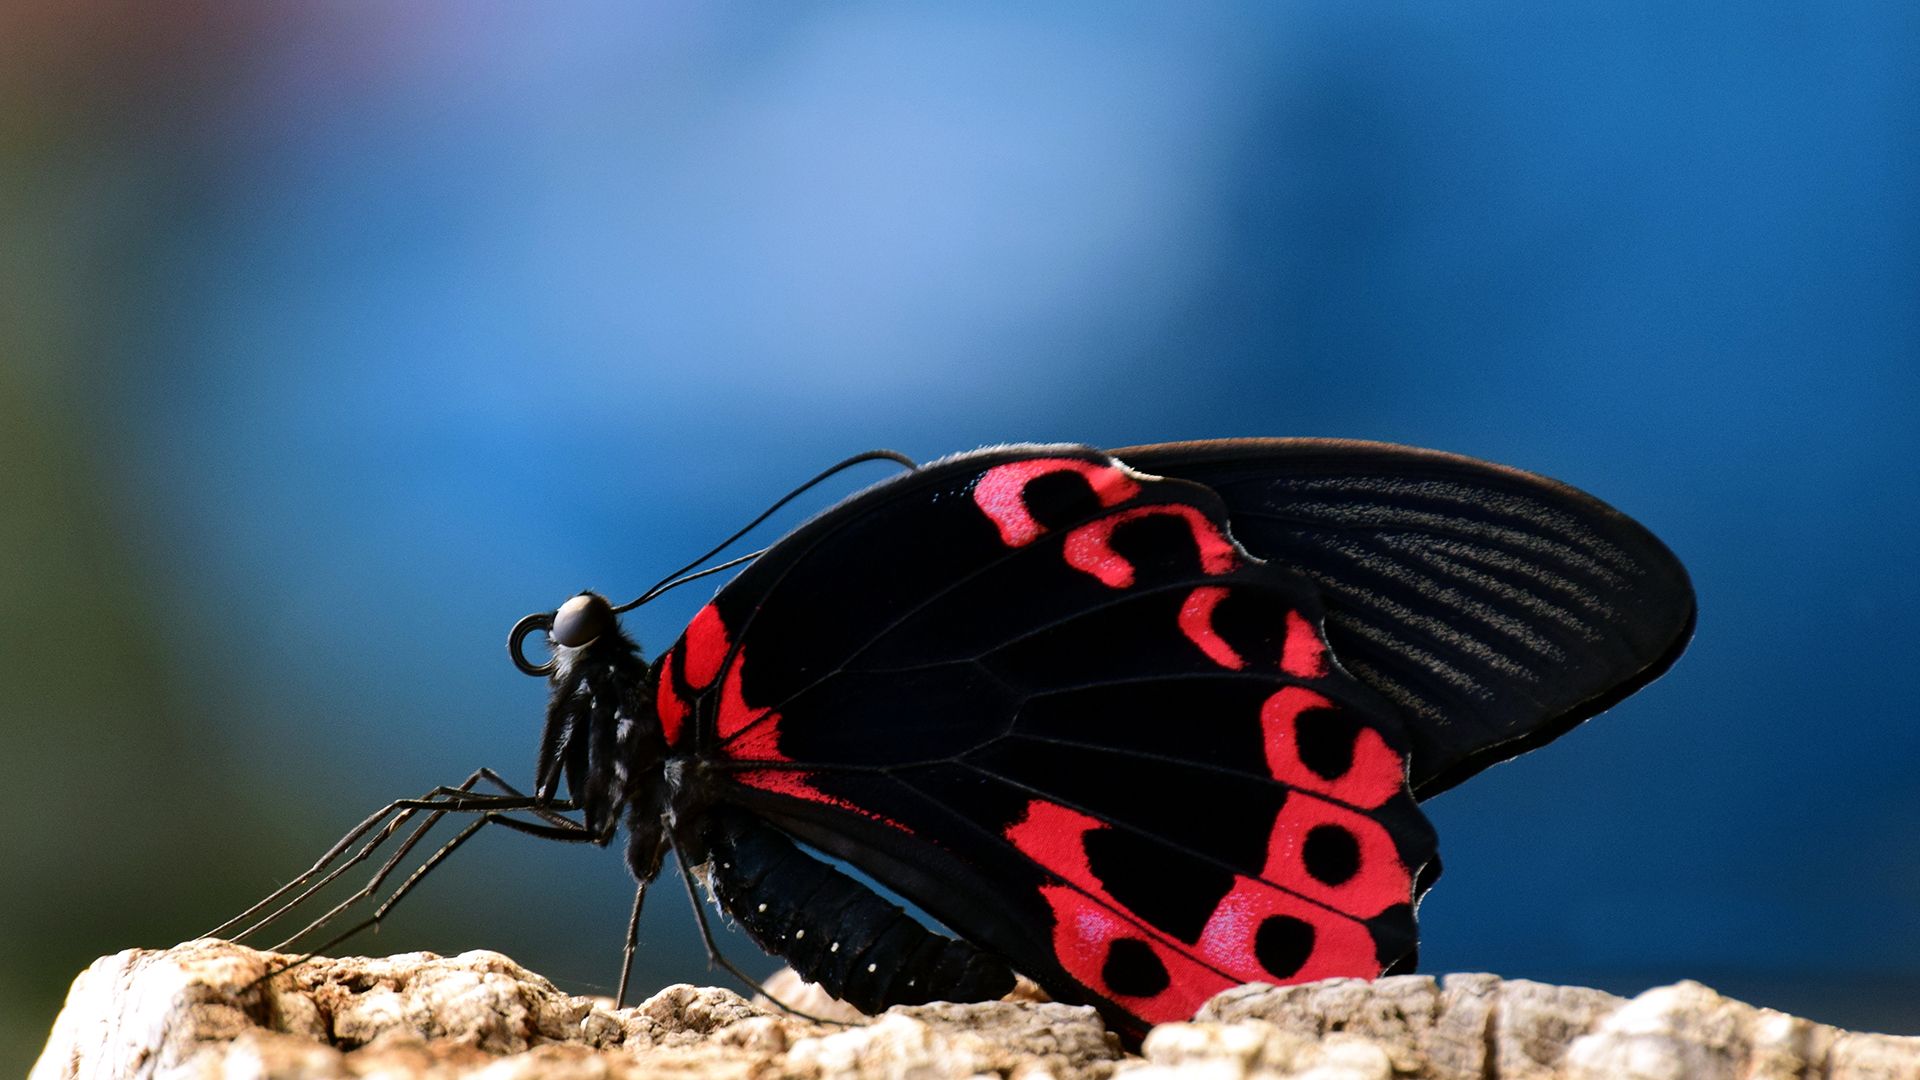 Sitting Butterfly Laptop Background